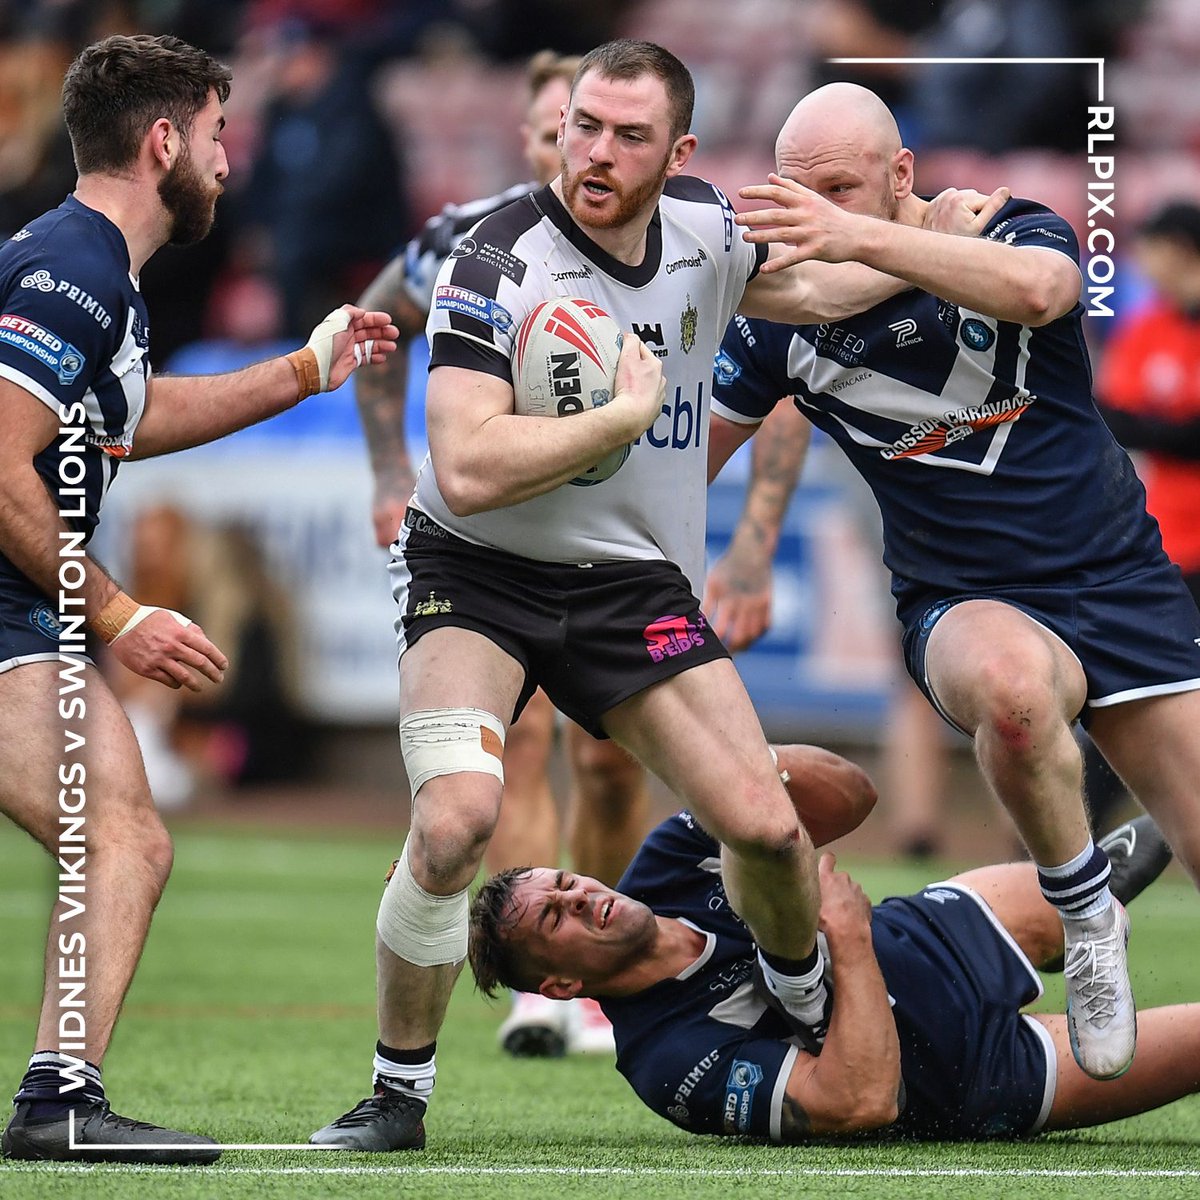 Images from @widnesrl v @Swinton_Lions in the Betfred Championship Rd2 game now online - rlpix.com #rugbyleague #rfl #widnes #widnesvikings #sportsphotography